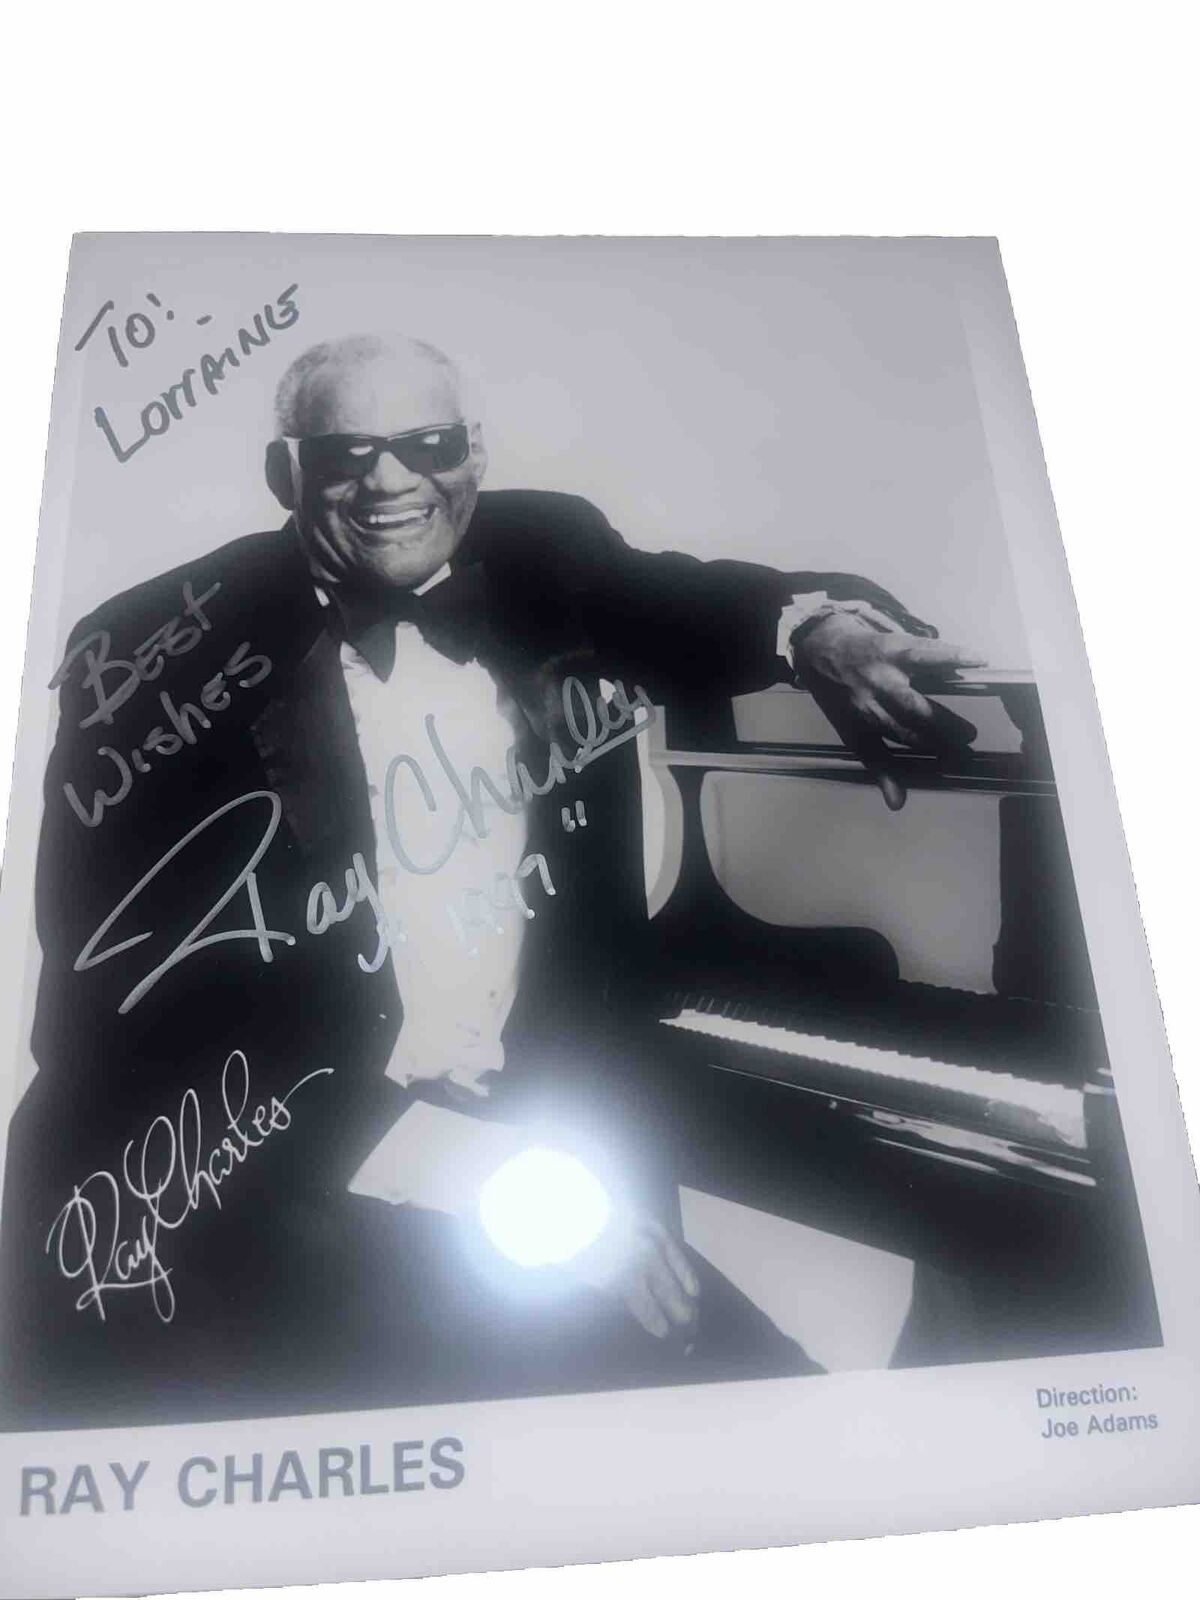 RAY CHARLES🎹Autograph hand signed 8x10 glossy photo🎶